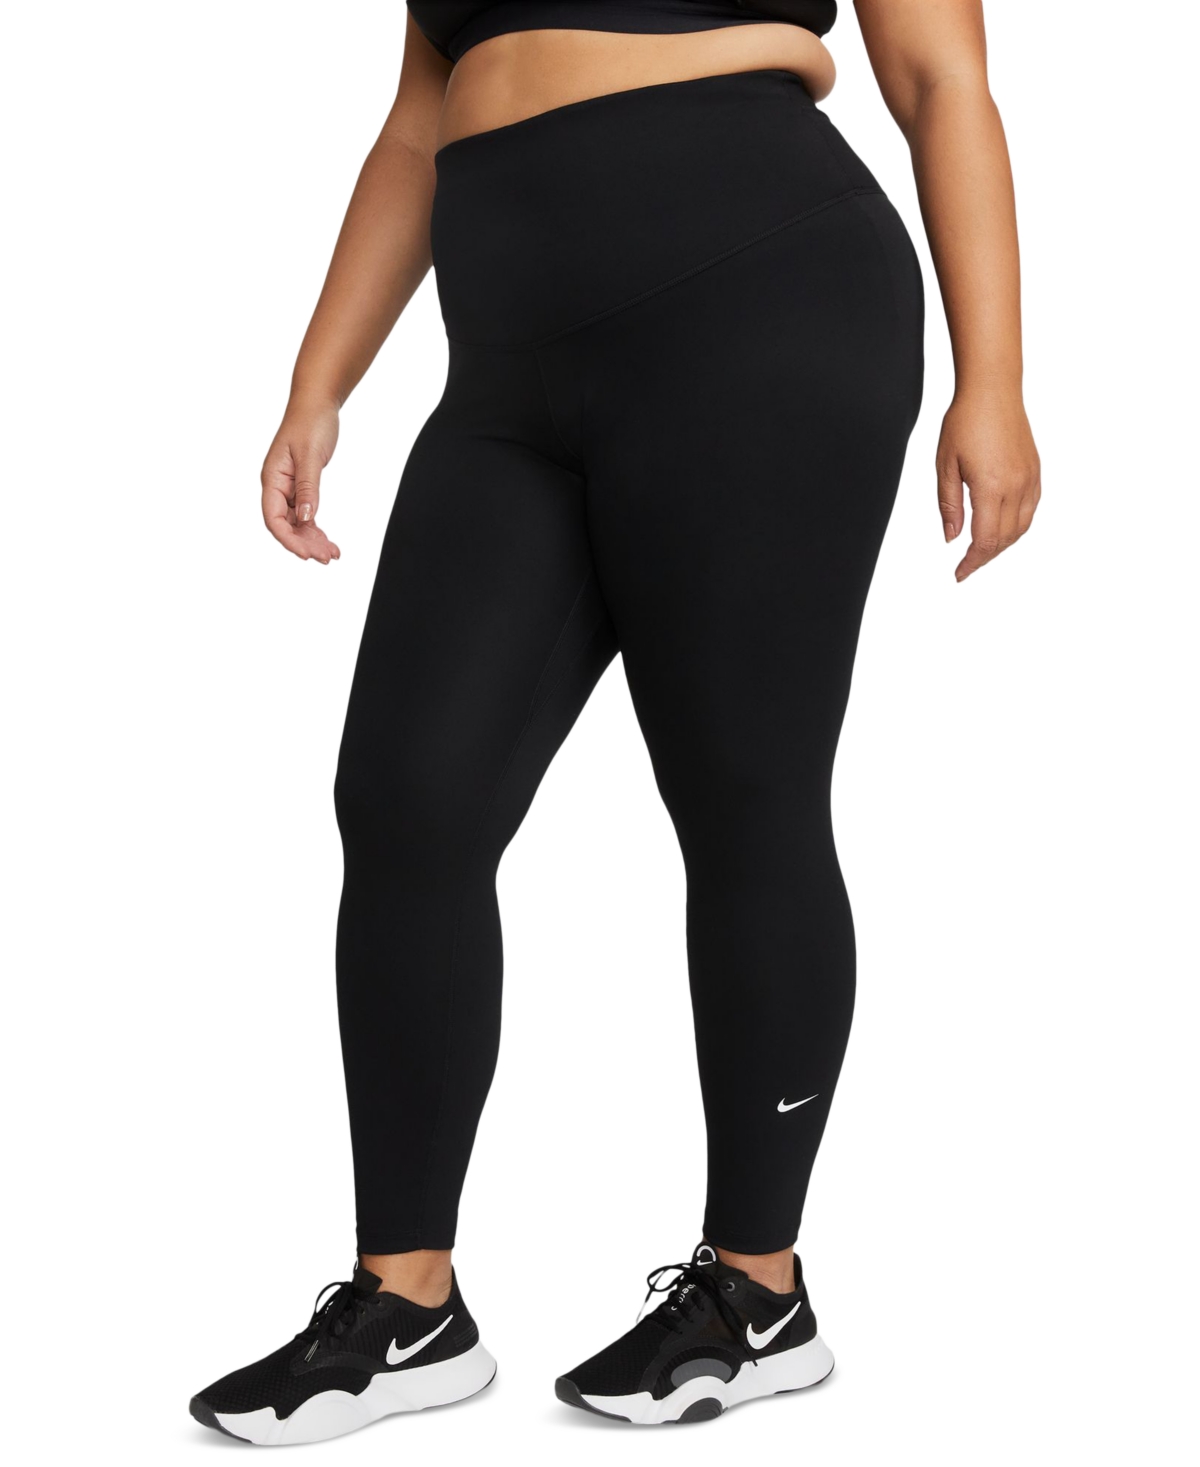 QWANG Women's Black Flare Yoga Pants, Crossover High Waisted